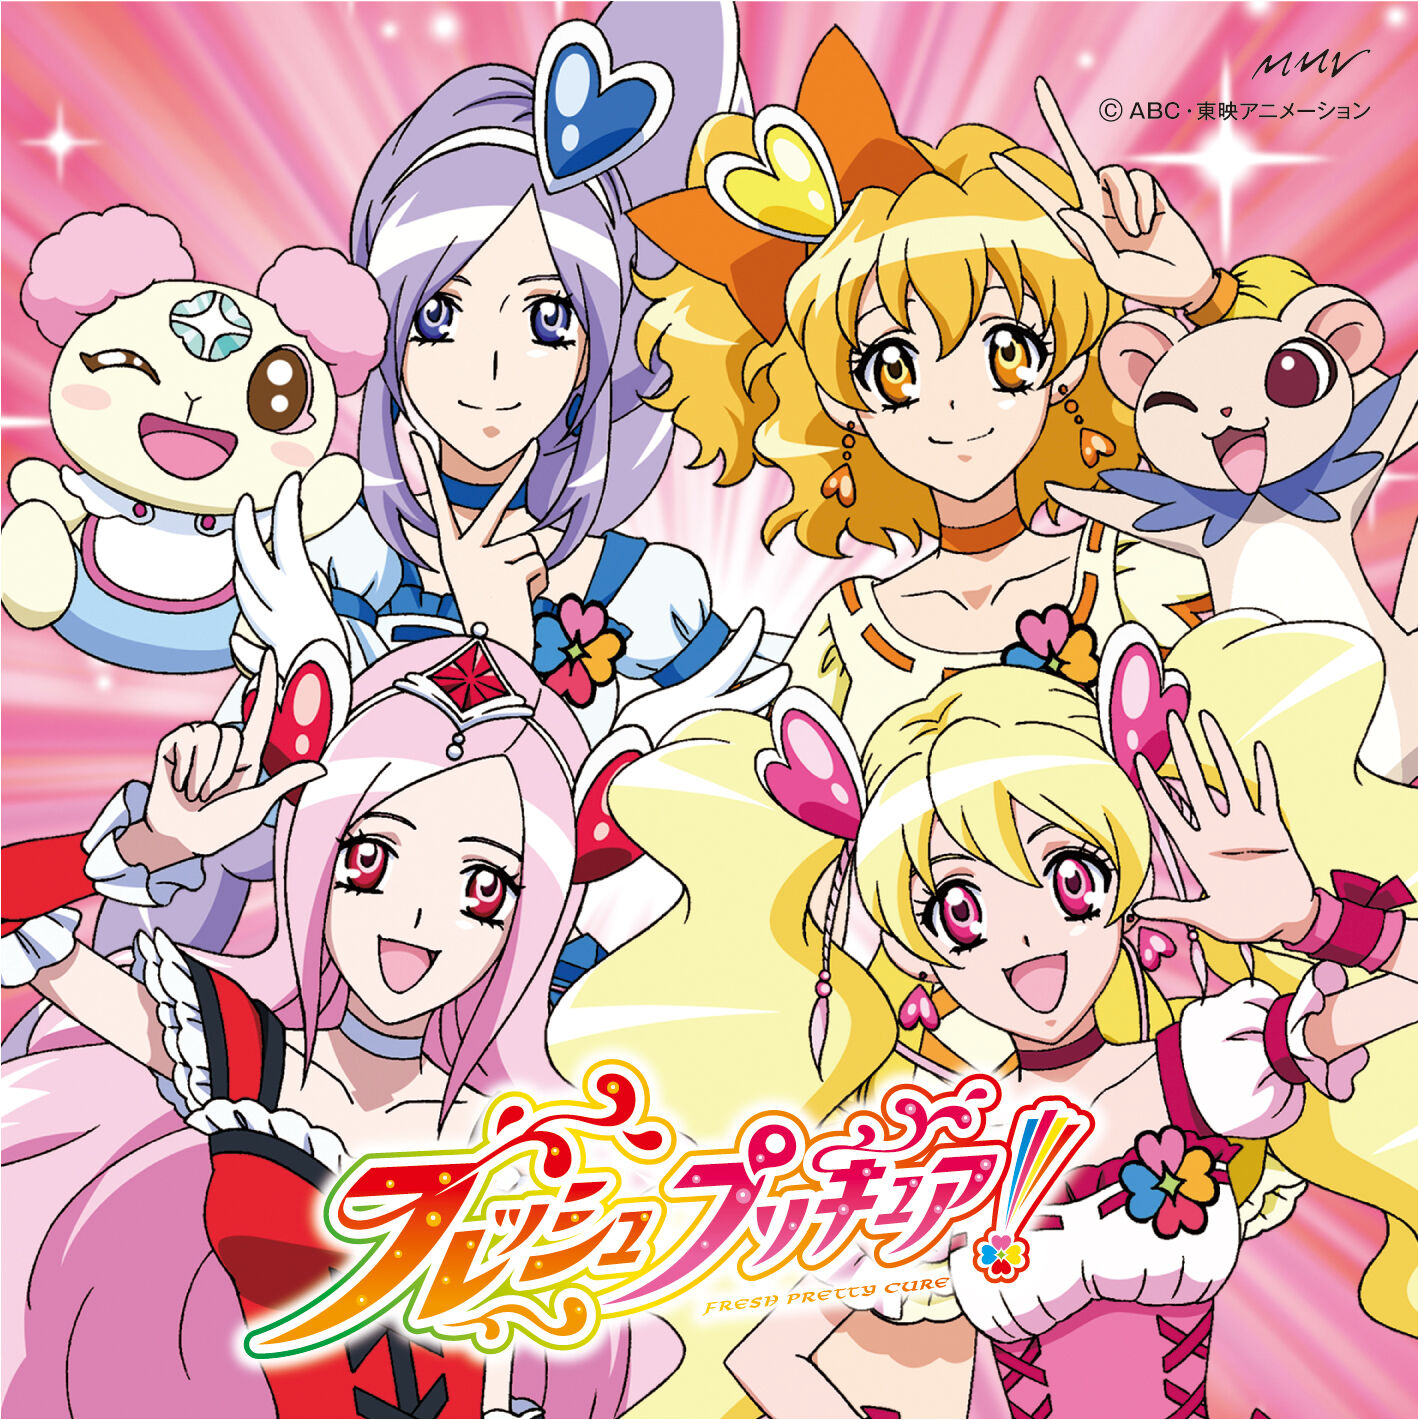 It's Fresh Precure, and it Finally Has Character Designs